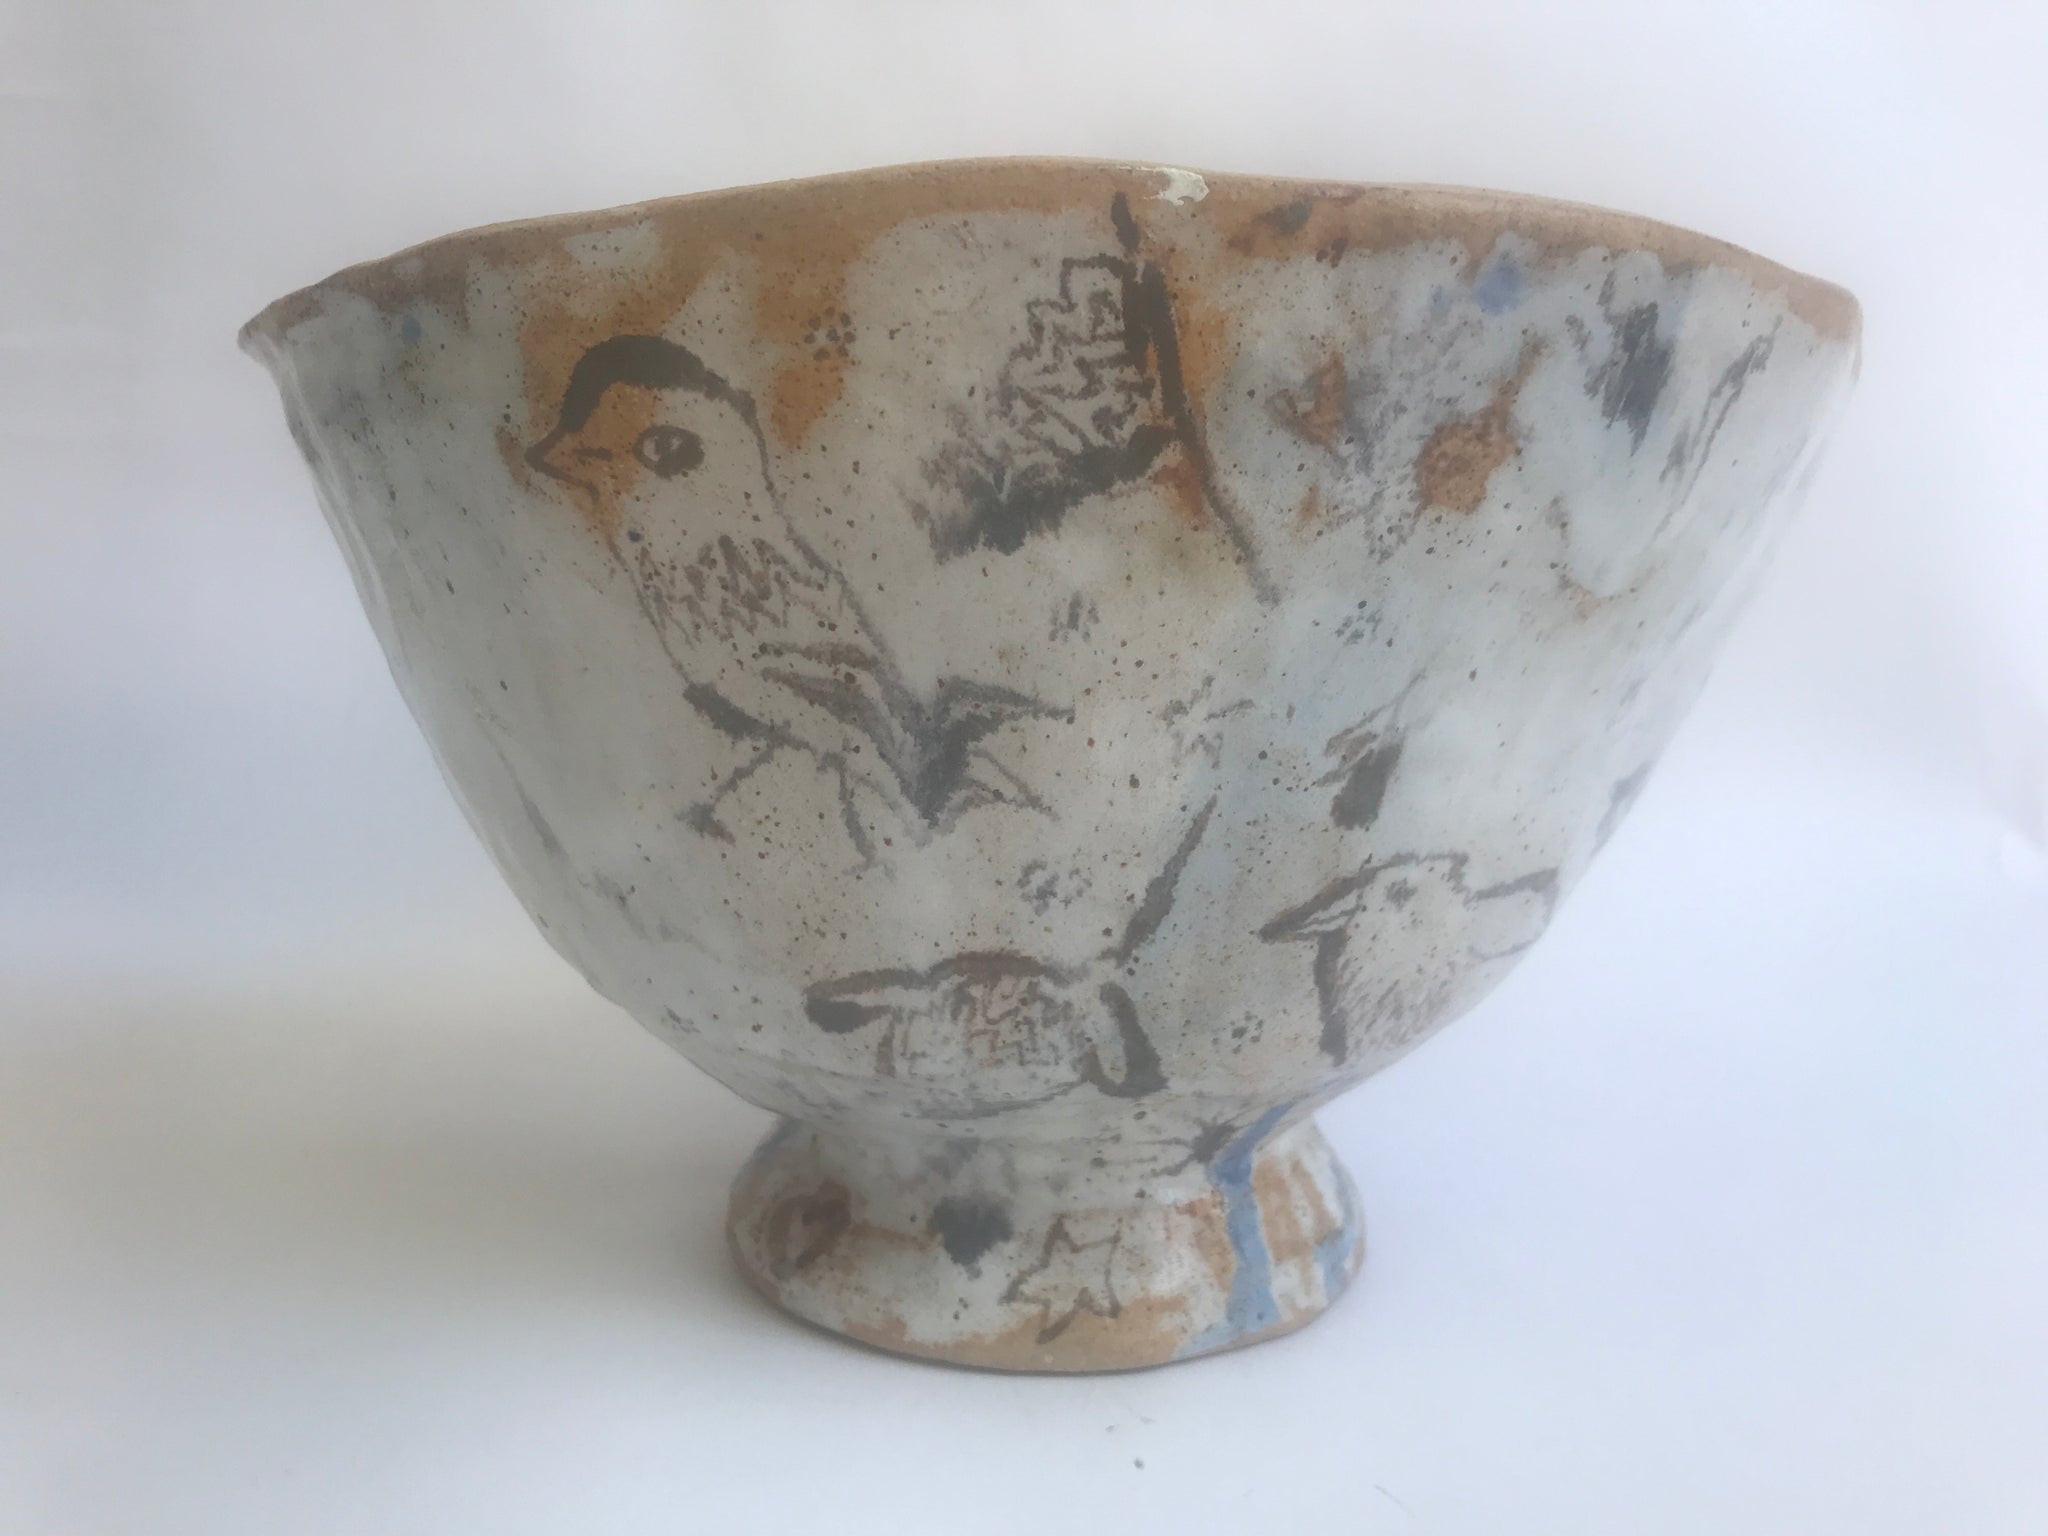 Illustrated Bowl - Sold